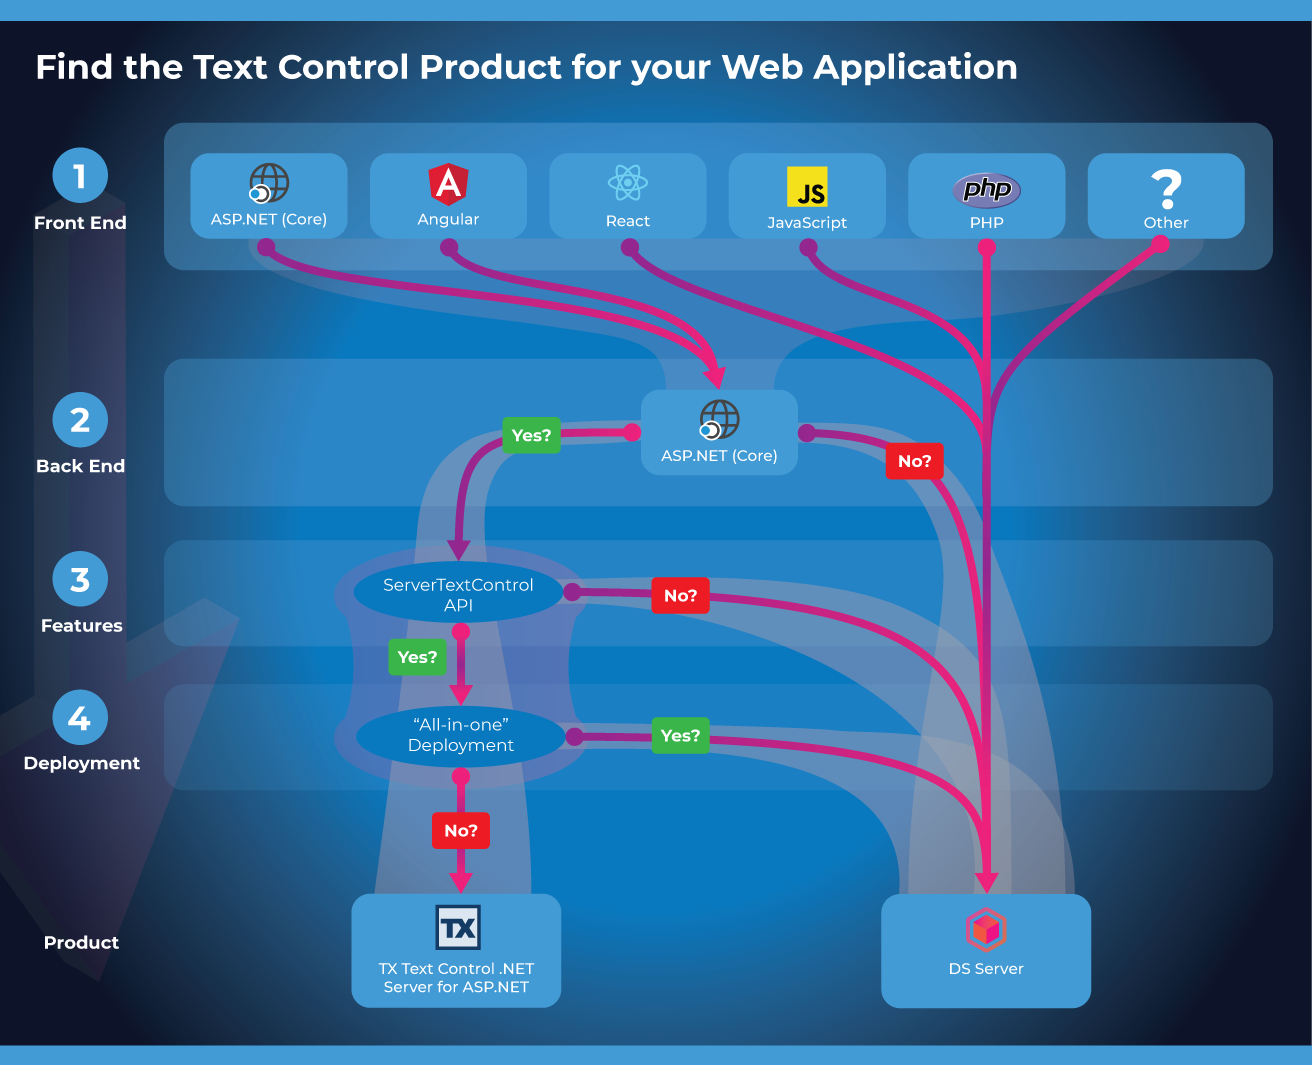 Find the right Text Control Product